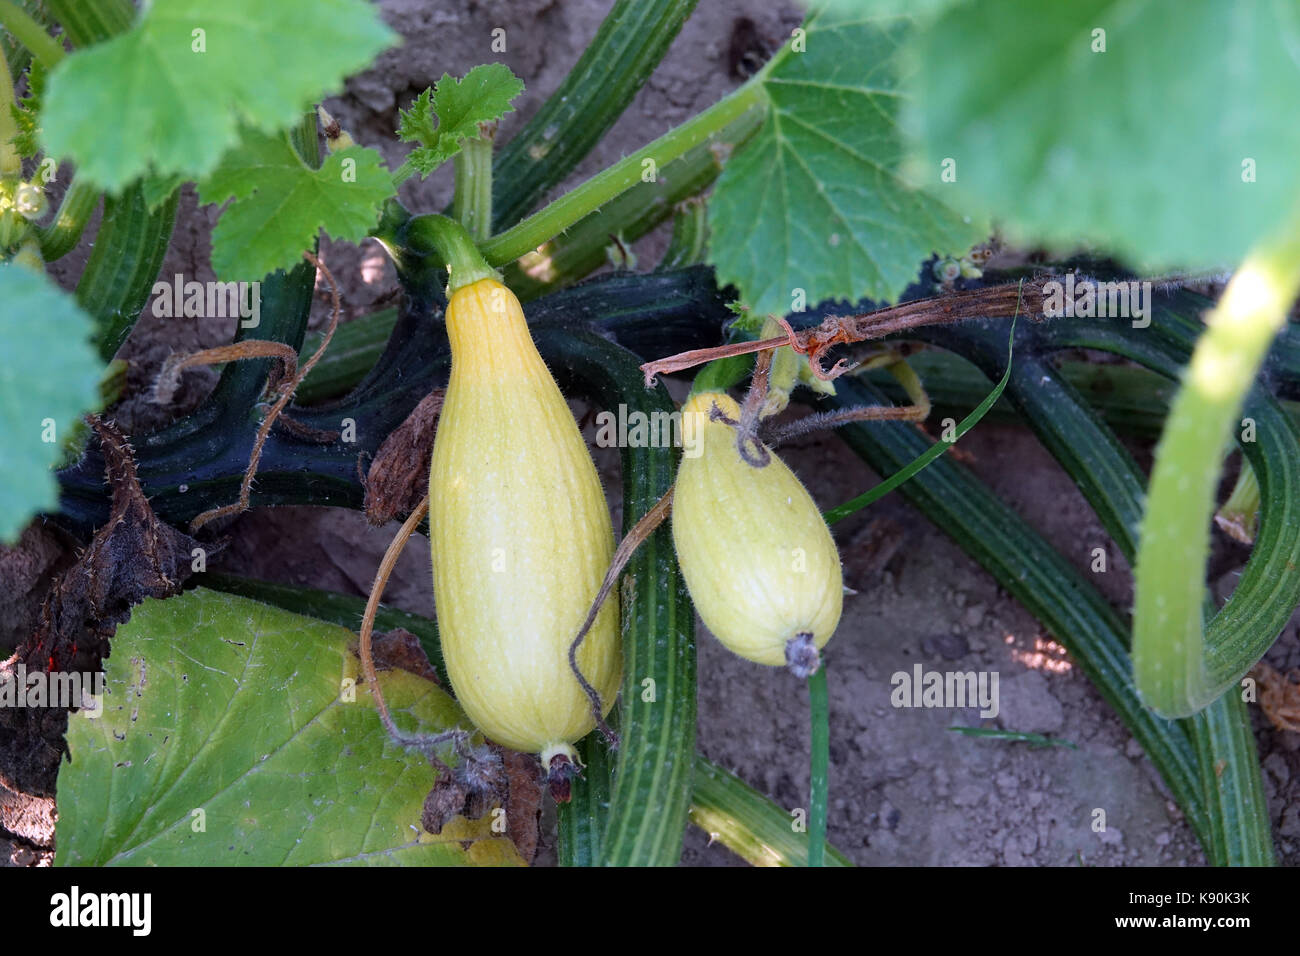 Cucumbers and squash are homegrown and ready to be harvested. Stock Photo